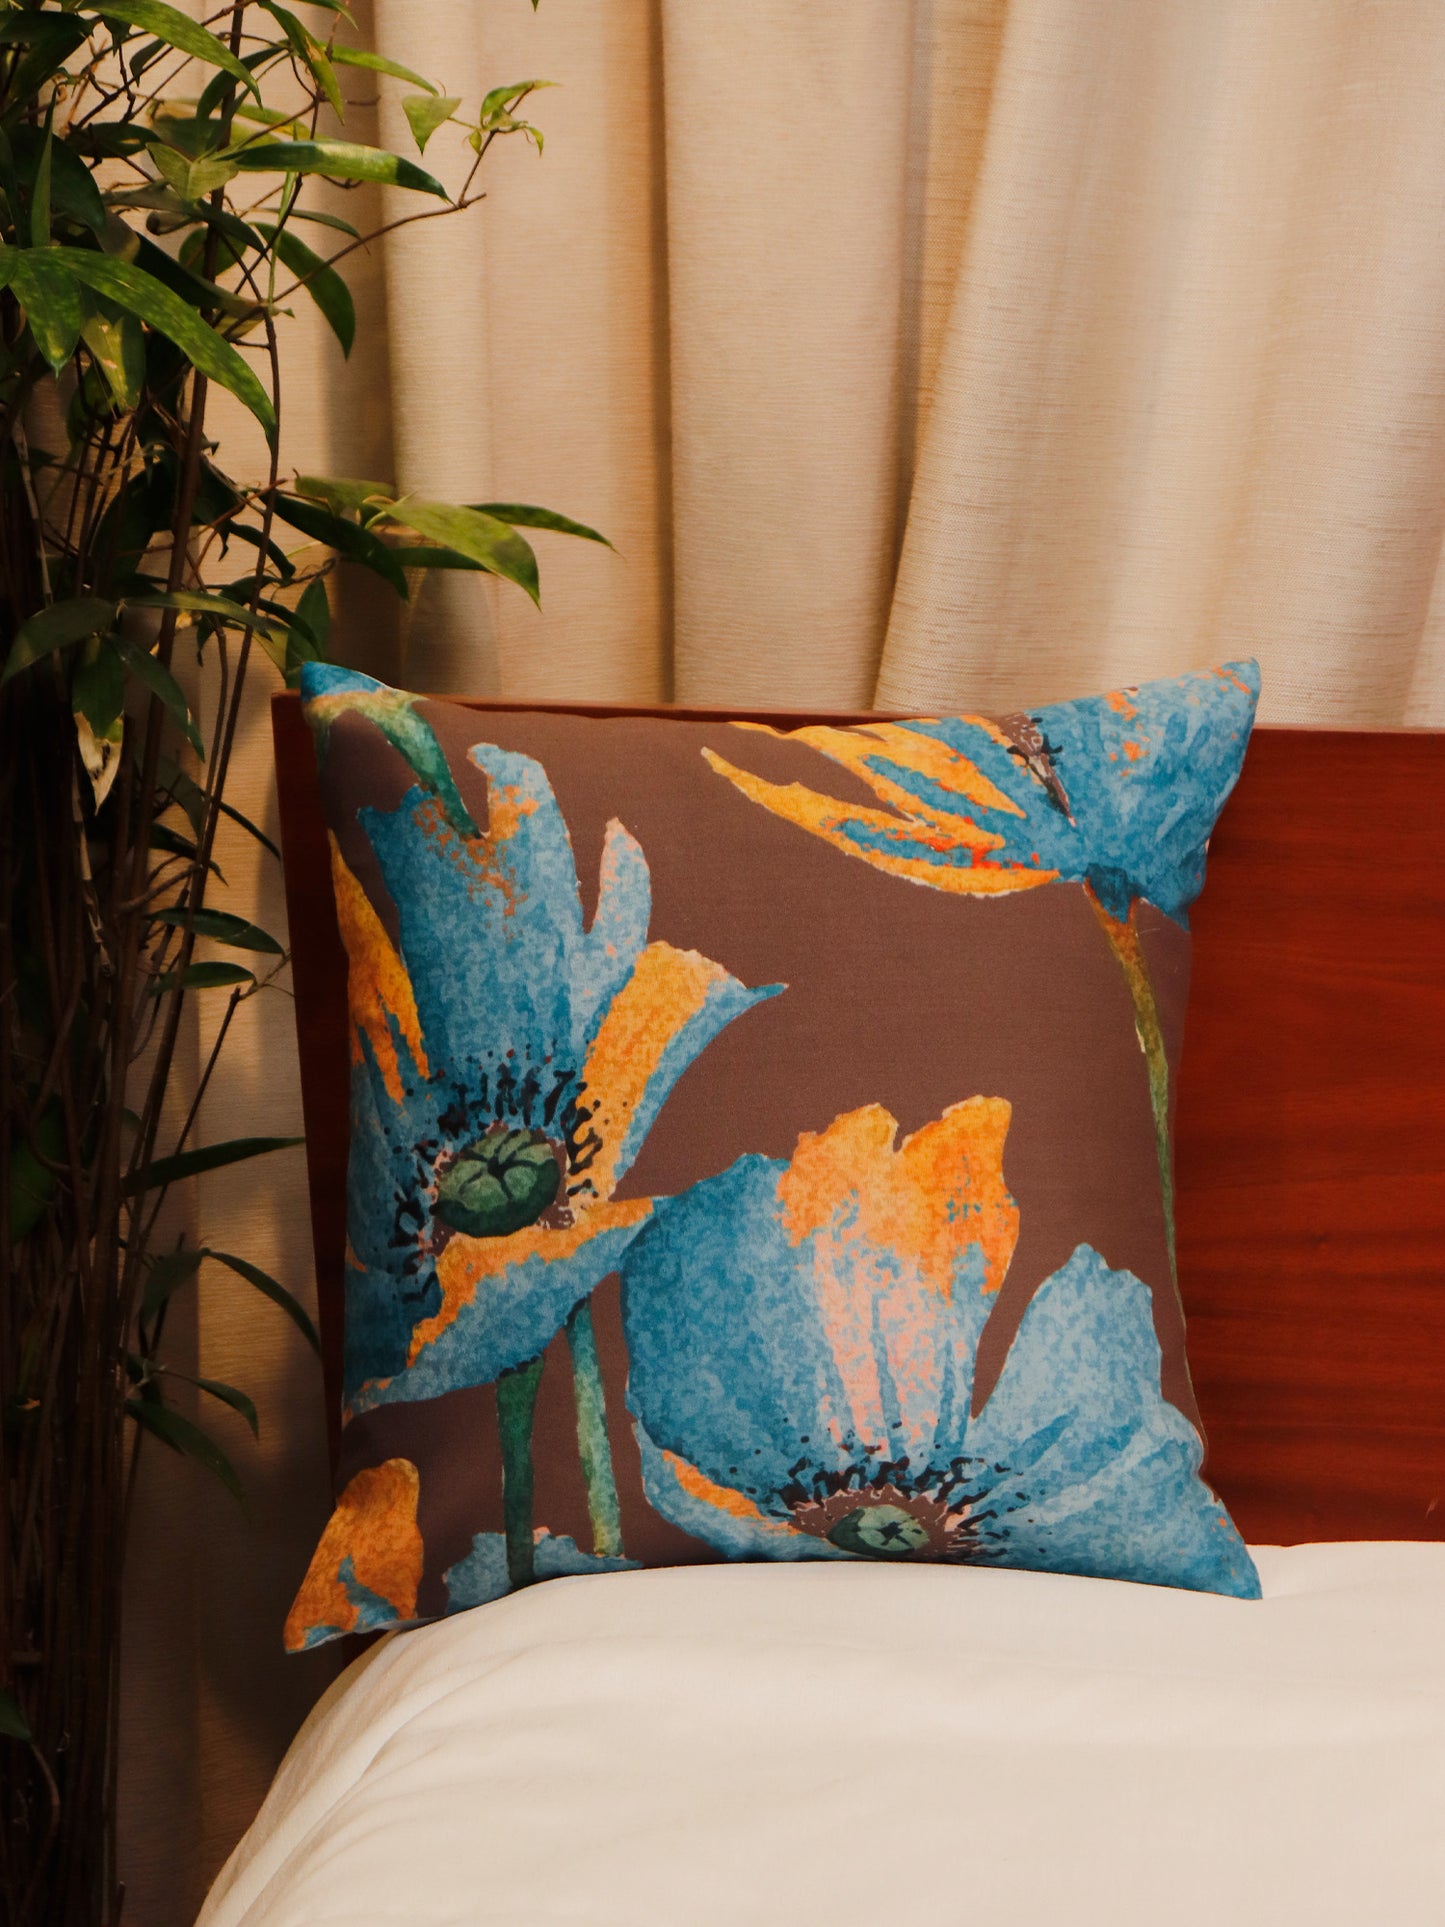 Cushion Cover Printed Poly Canvas Floral Brown Blue Yellow - 16"x16"